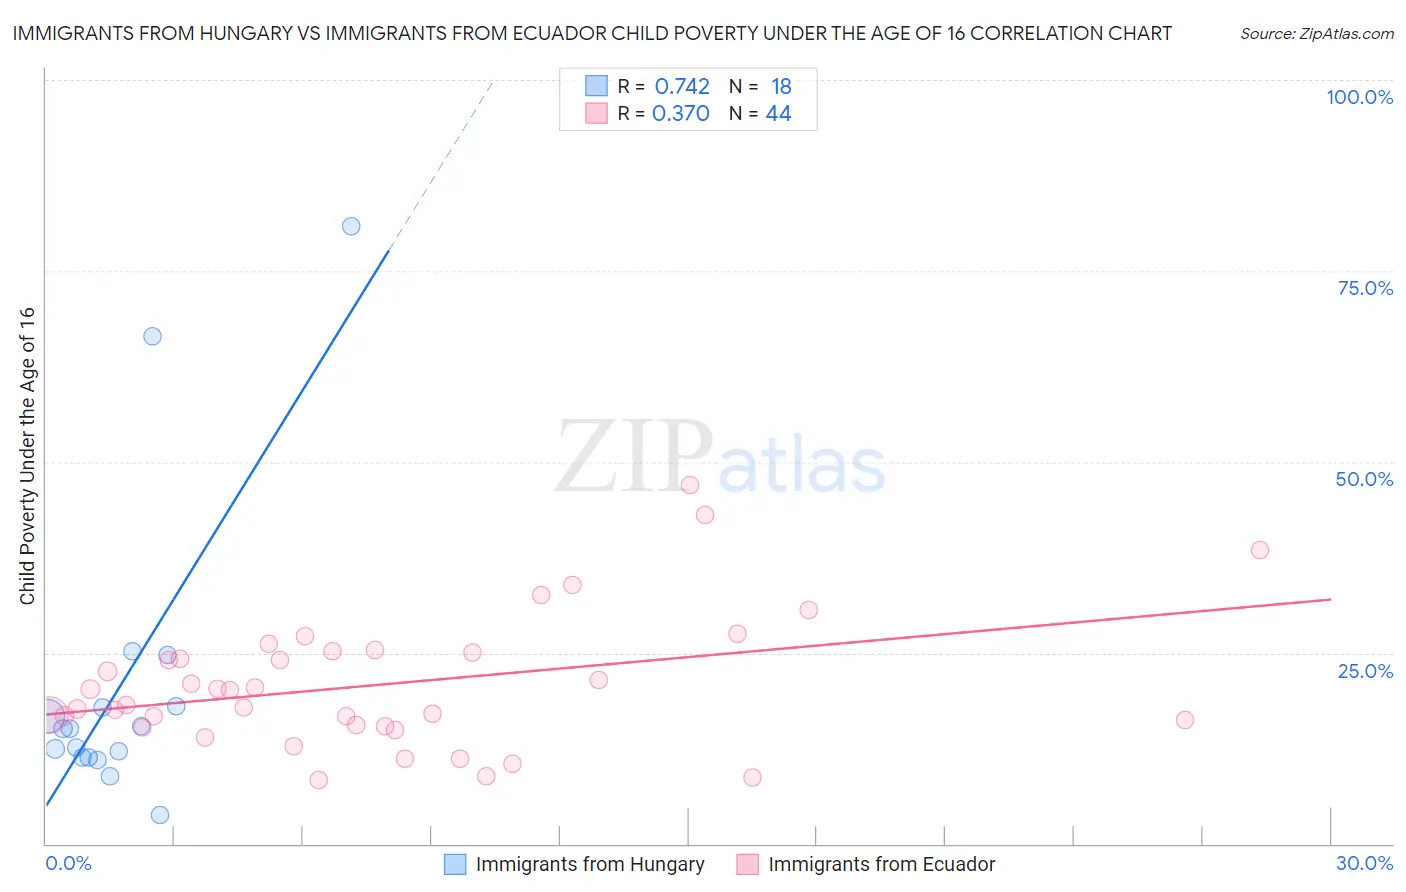 Immigrants from Hungary vs Immigrants from Ecuador Child Poverty Under the Age of 16